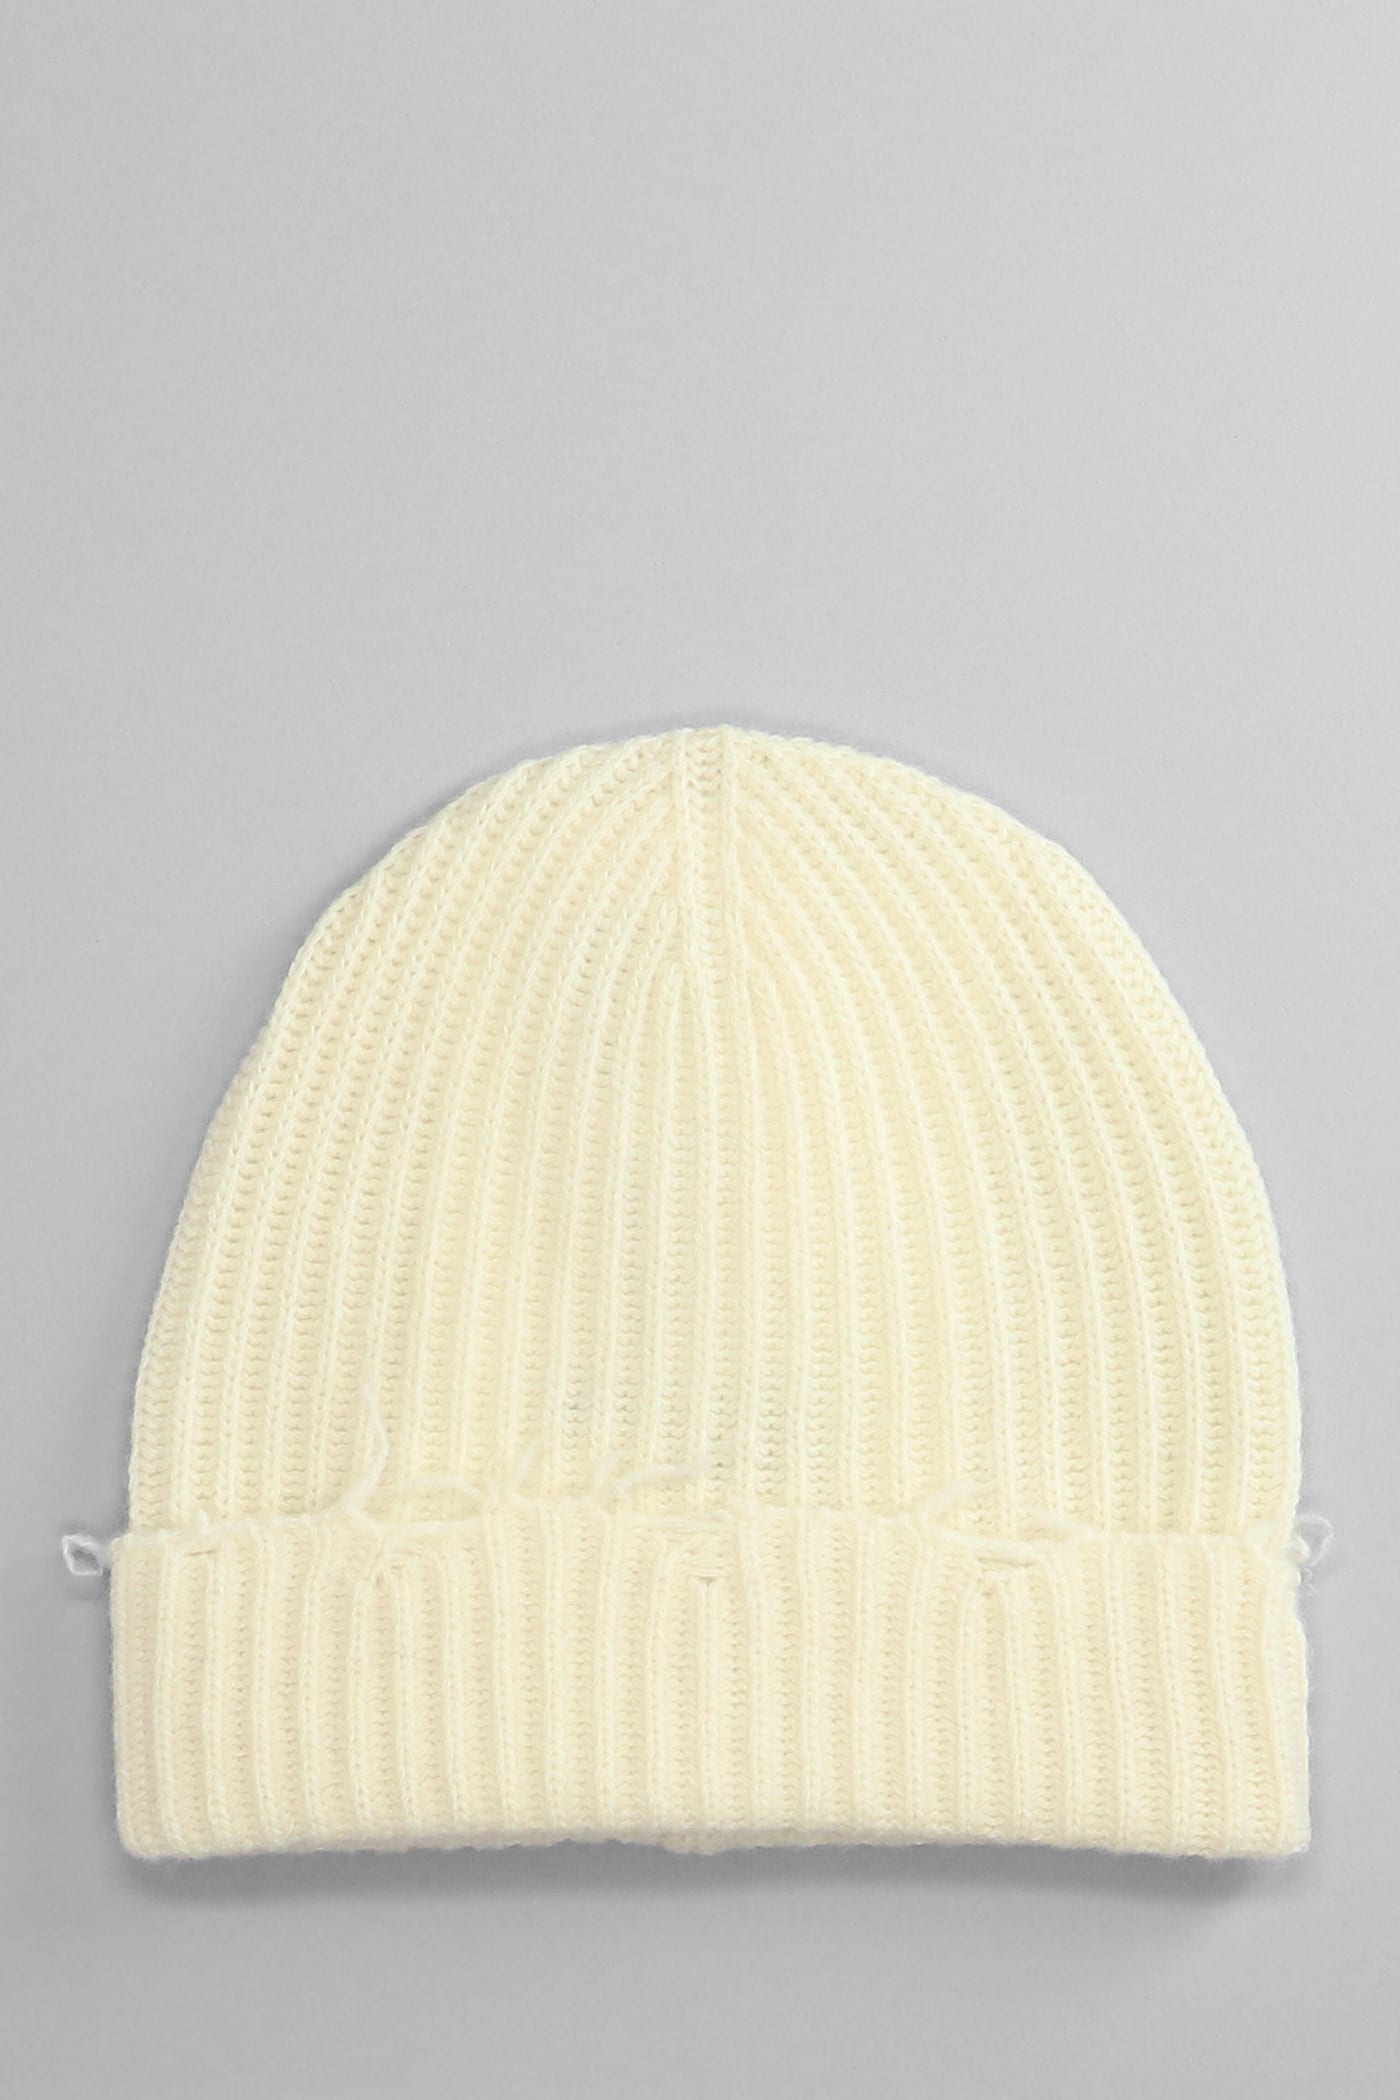 Mauro Grifoni Hats In White Wool